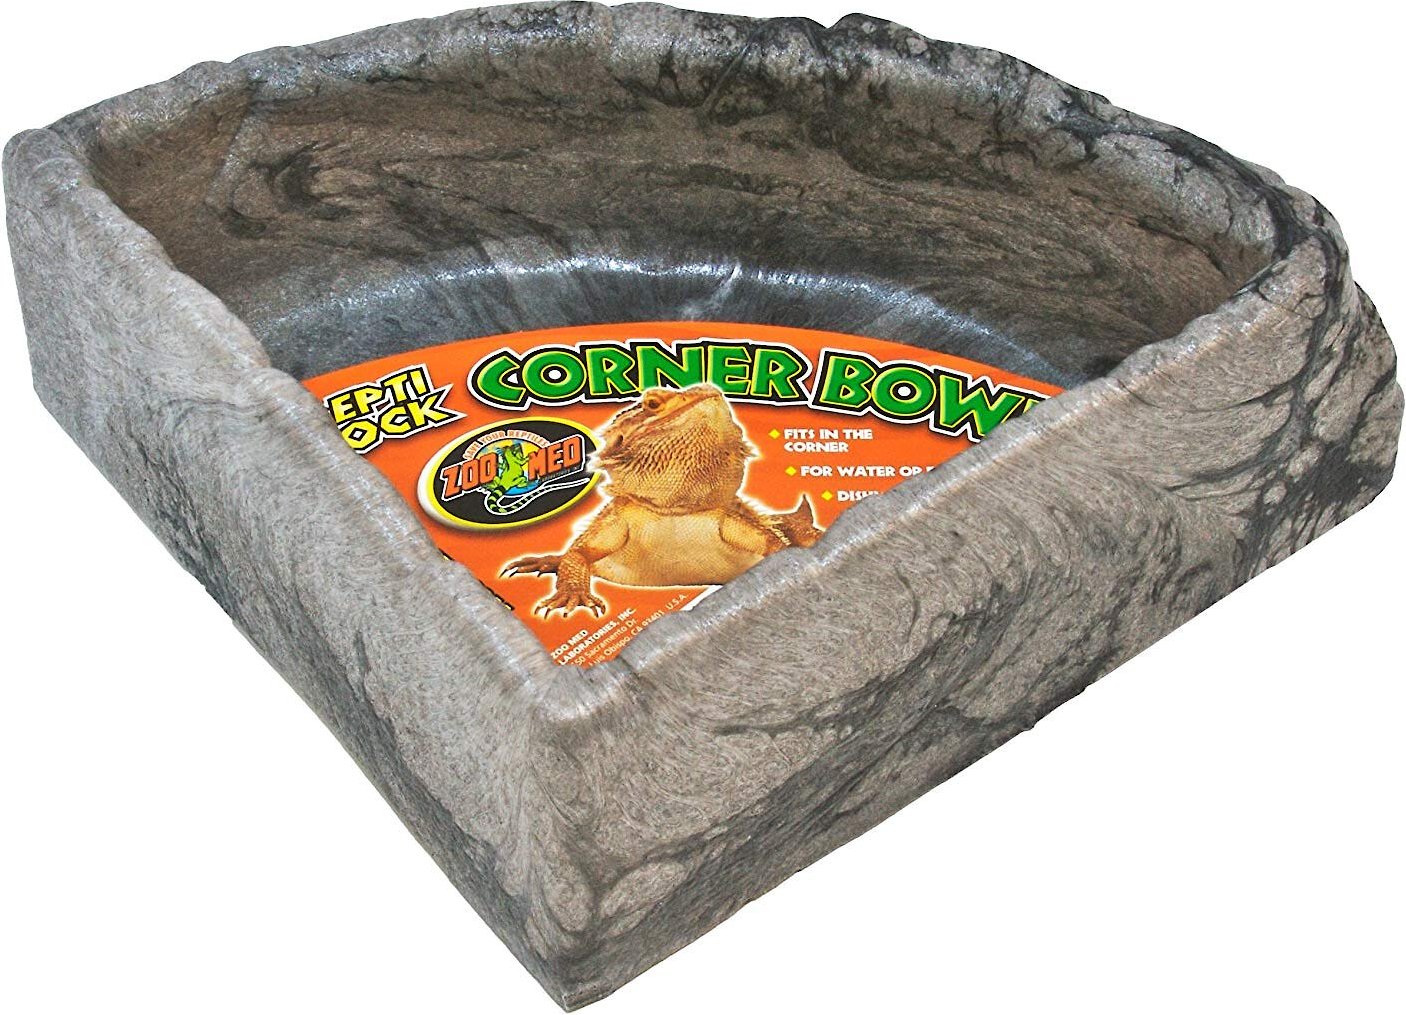 Lizards Tortoises & More Zoo Med Repti Rock Water Dish Small for Reptiles 